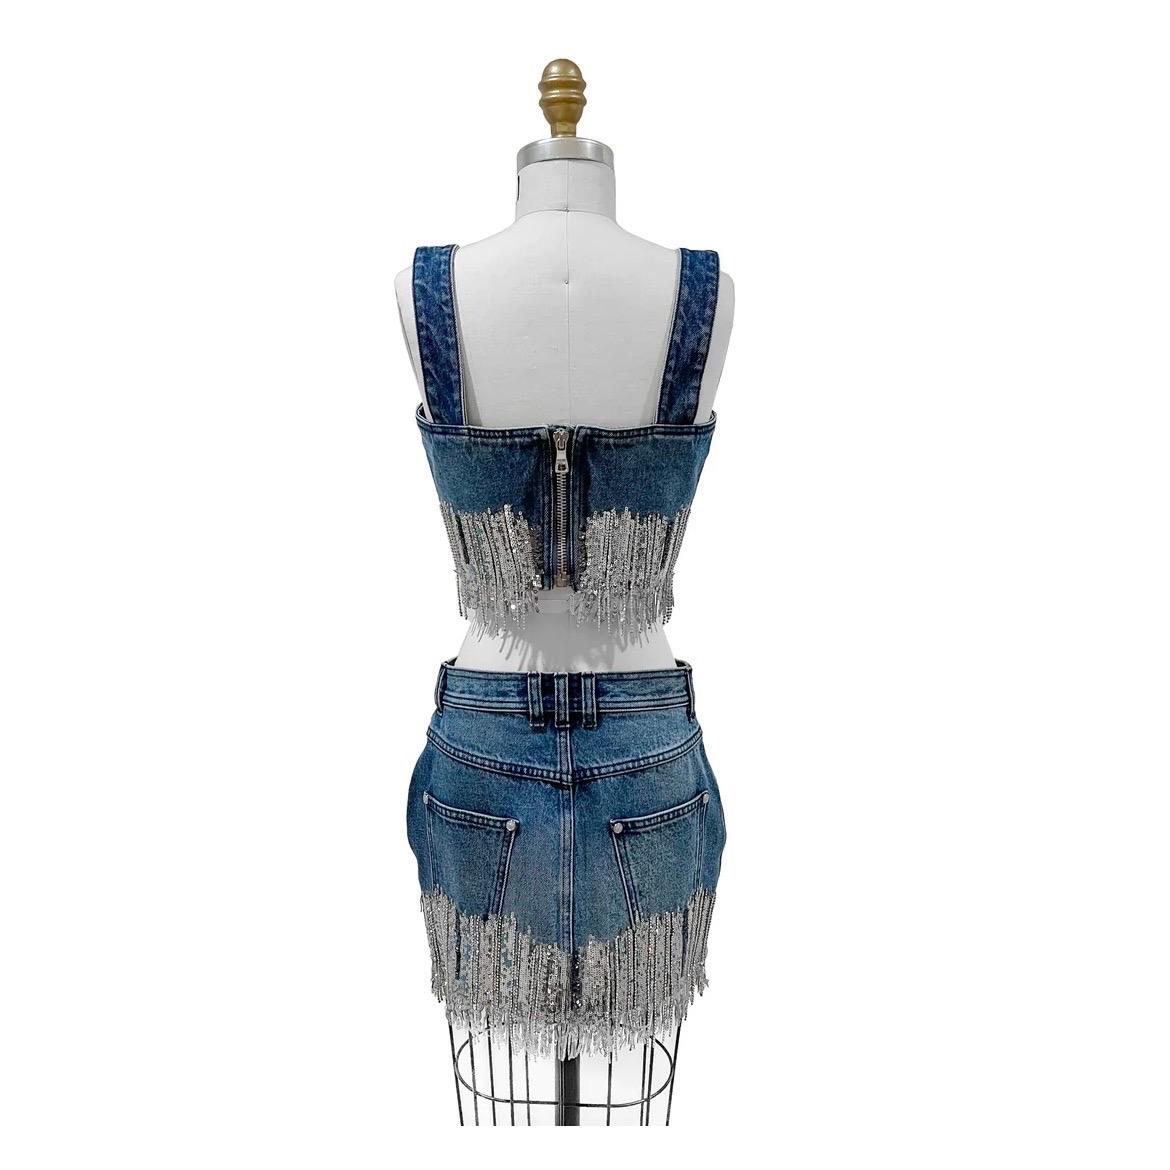 Denim Silver Sequin Fringe Mini Skirt Set by Balmain
Resort 2020
Made in Italy
Denim two piece
Silver sequin and crystal fringe embellishment 
Crop top has large back zip closure
Silvertone hardware
Sleeveless
Mini skirt has dual front and back